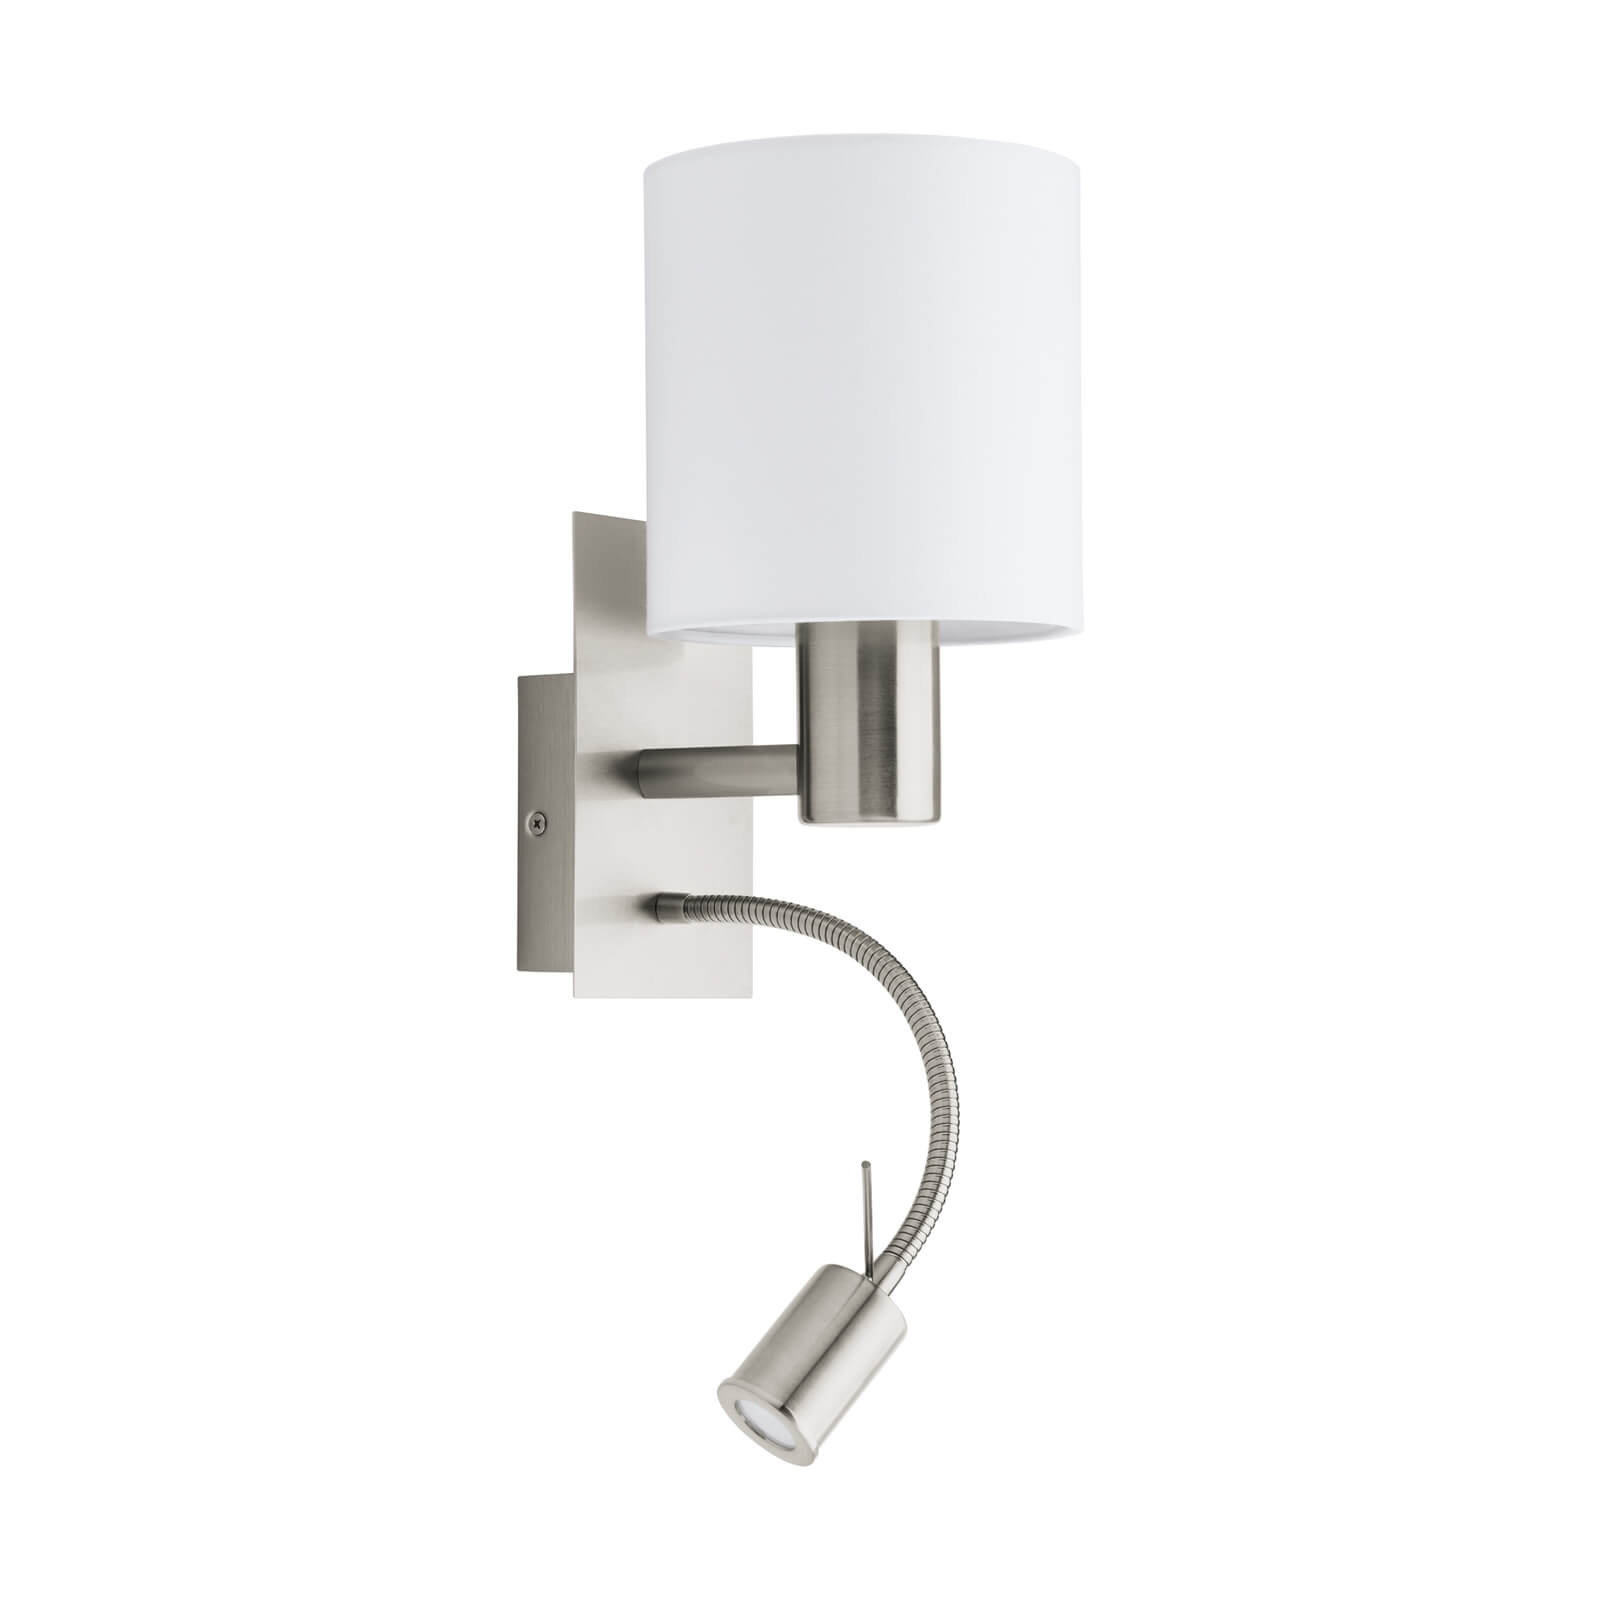 Eglo Pasteri Wall Light with LED Reading Lamp - White